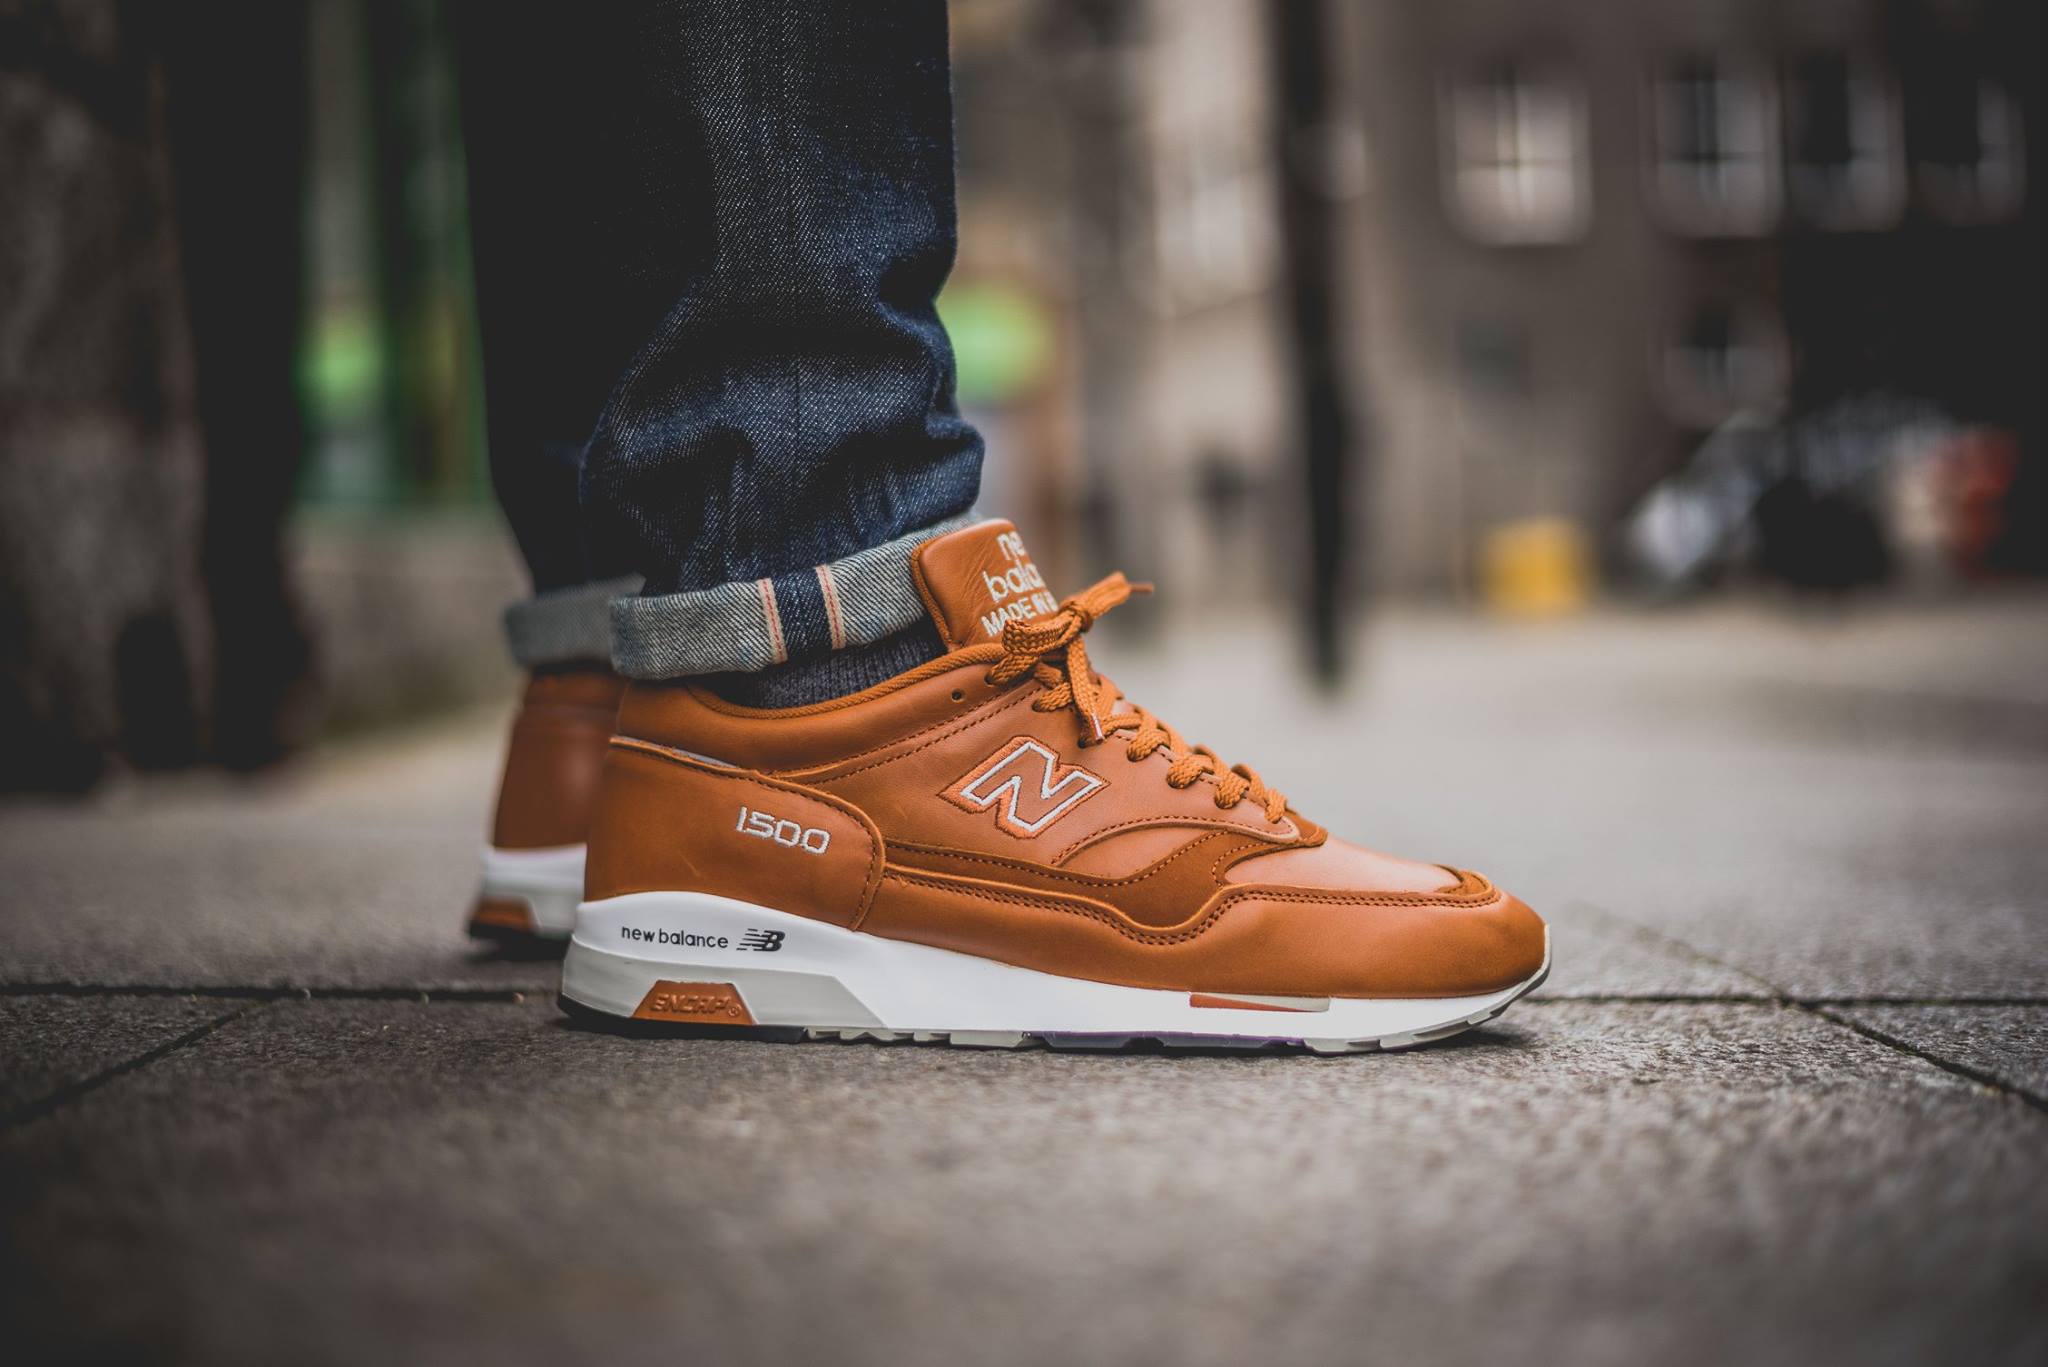 New Balance 1500 Leather Pack made in Flimby | WAVE®